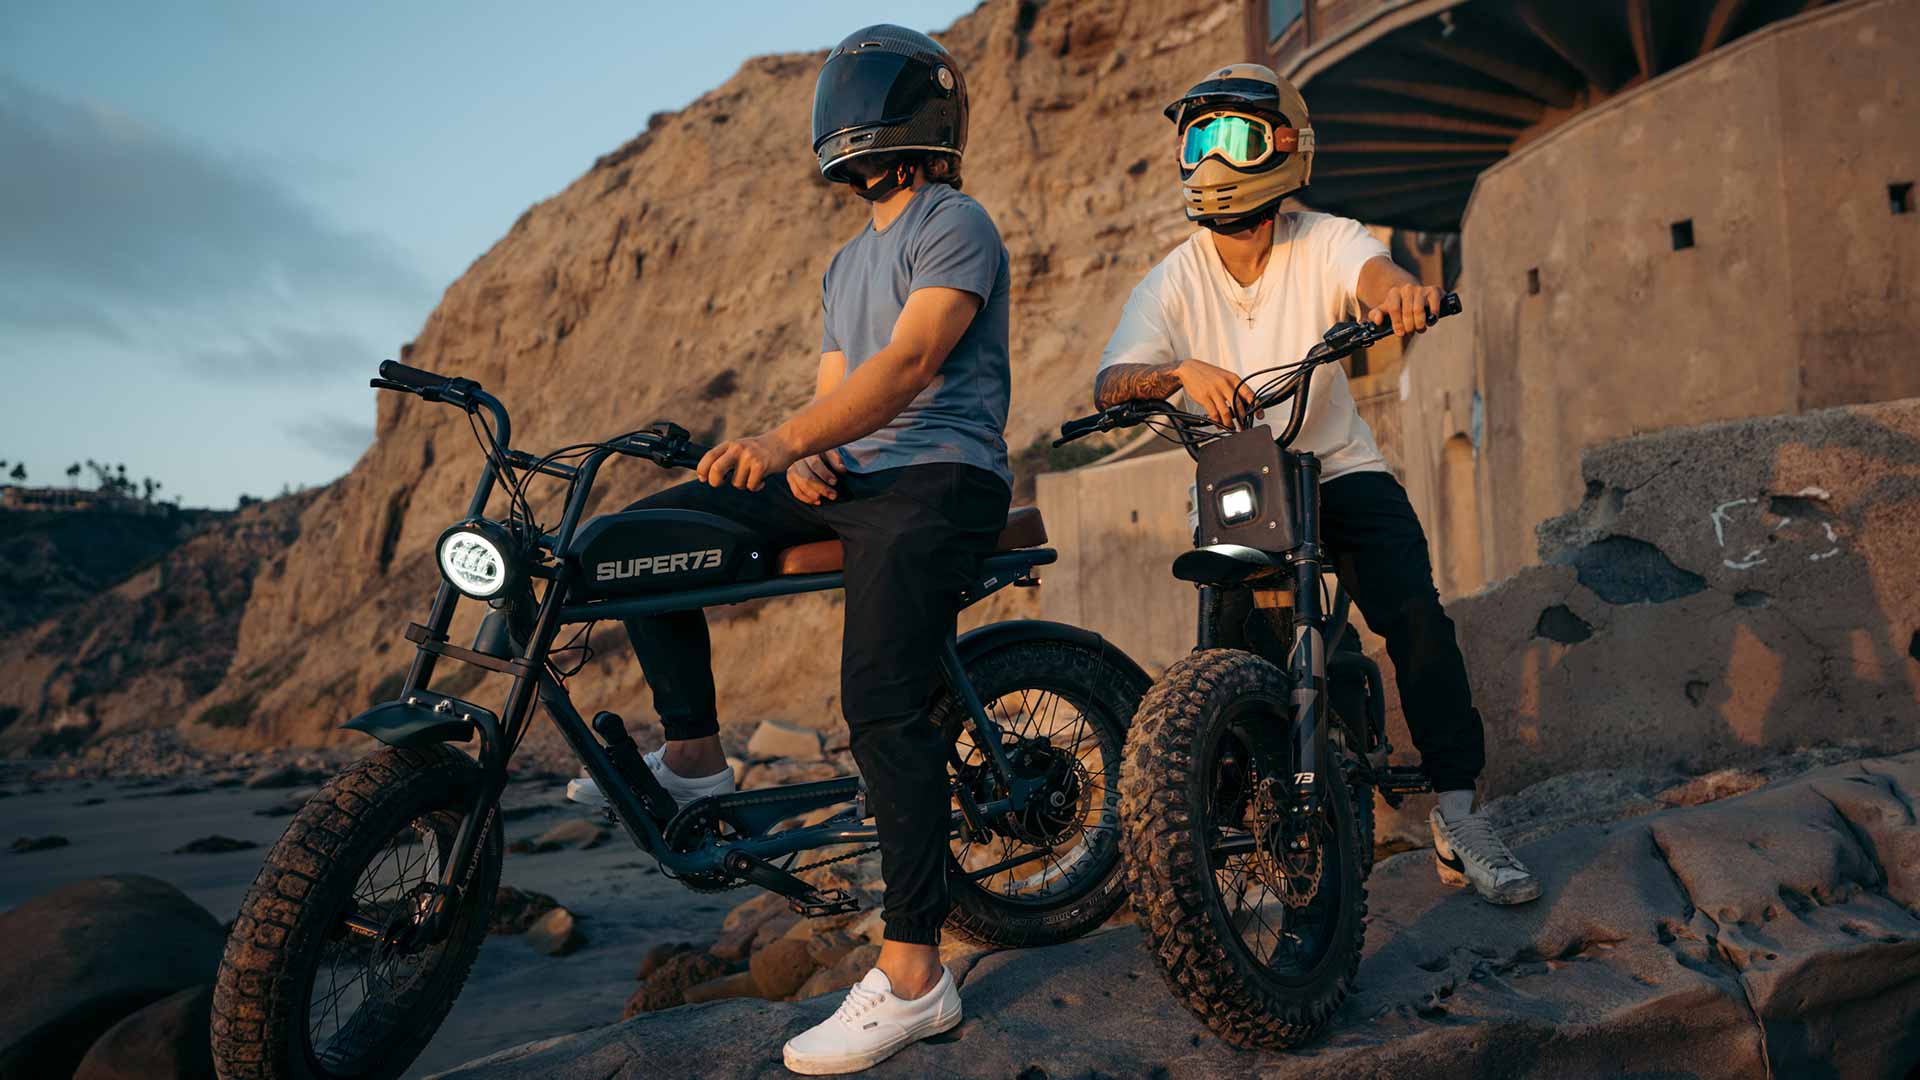 Two riders watching the sunset on their SUPER73 e-bikes on a cliff.